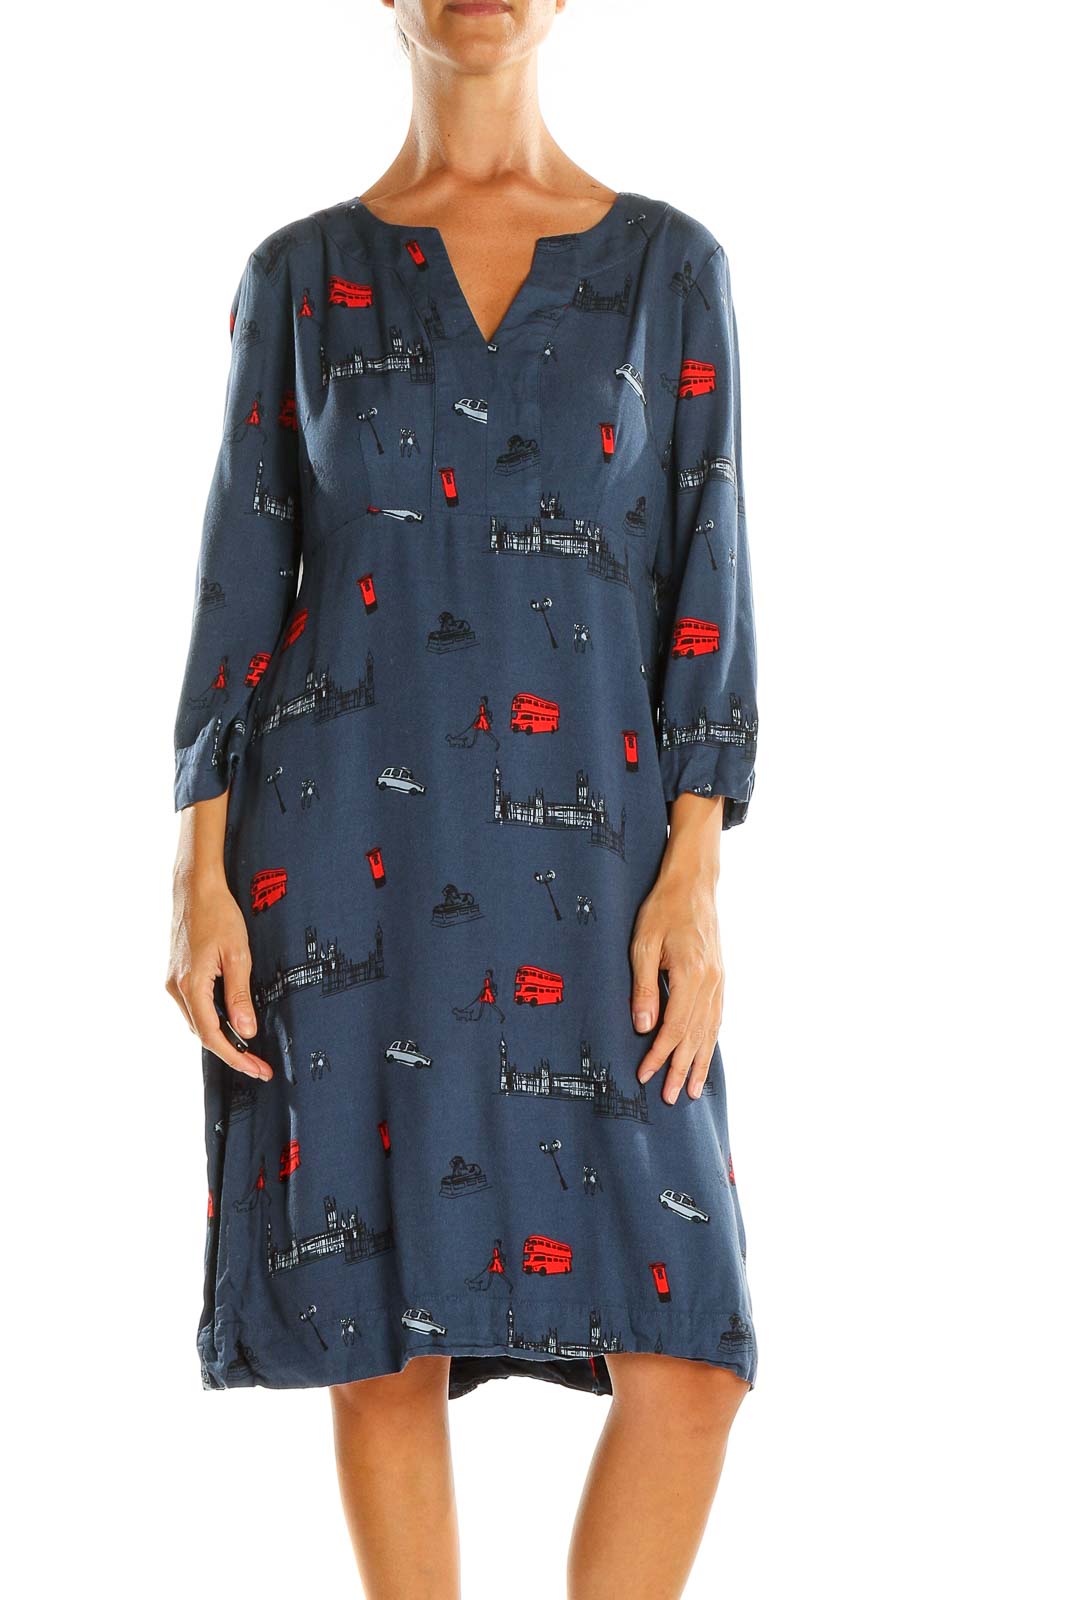 Boden Dress Brick Red - Alhambra  Women's Clothing Boutique, Seattle